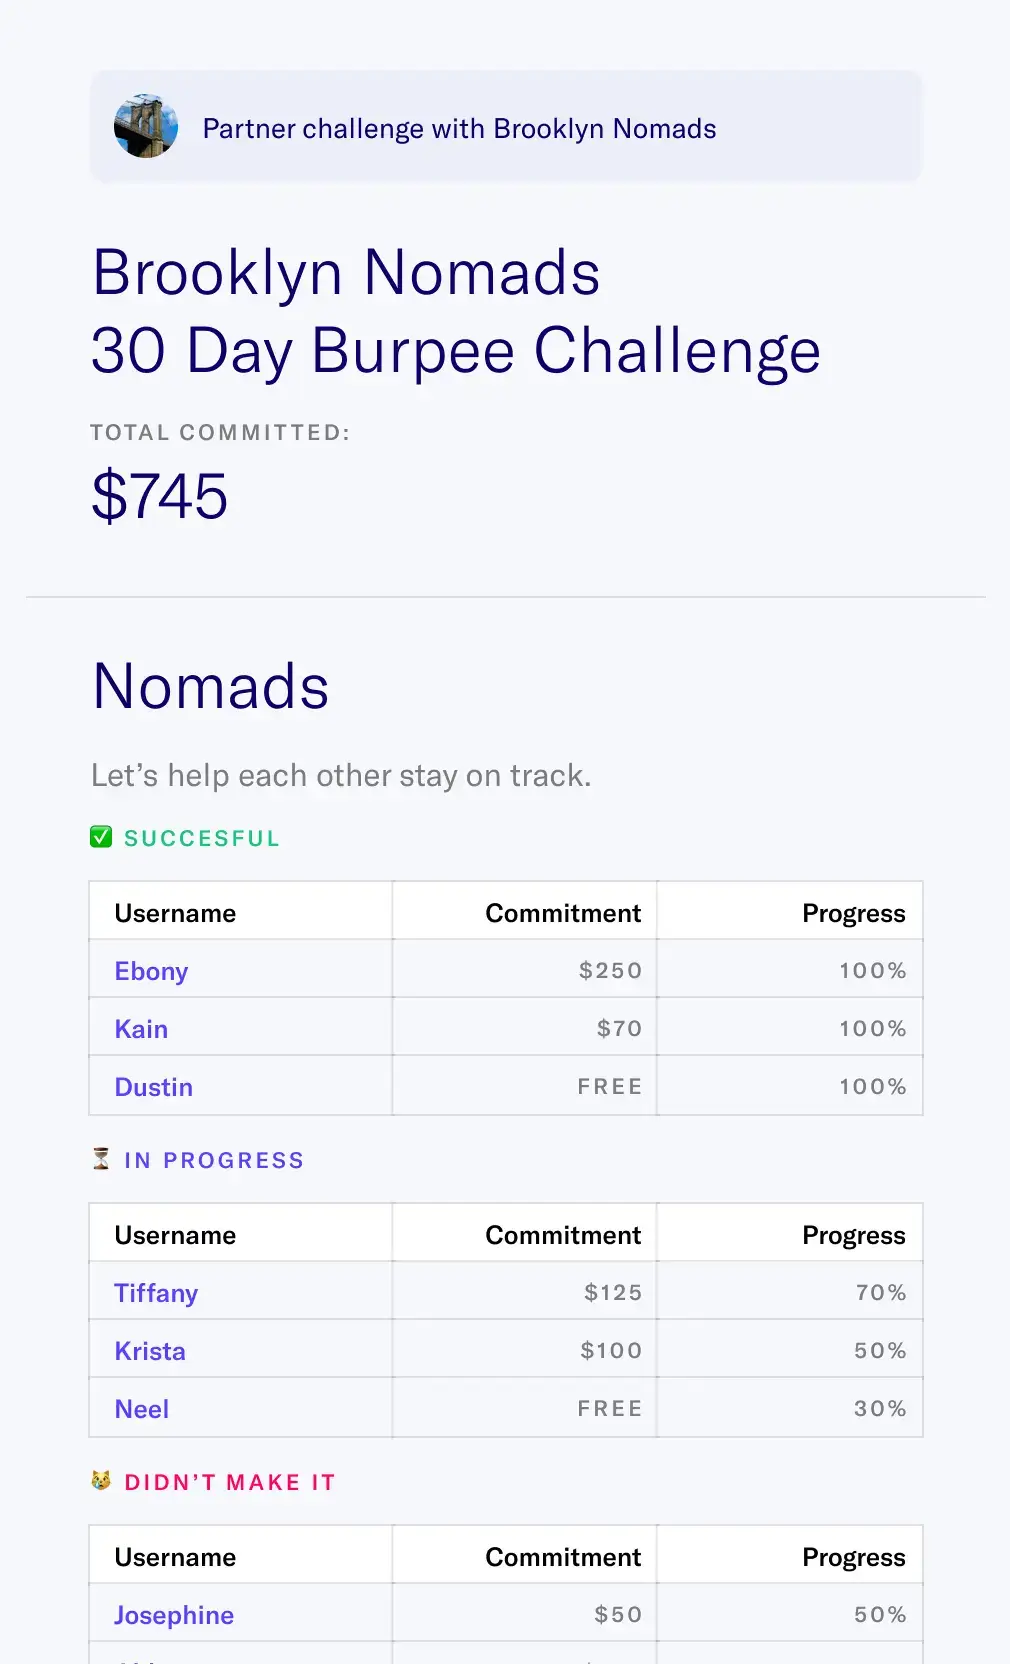 A 30 day challenge done as a community. This group challenge is doing burpees every day